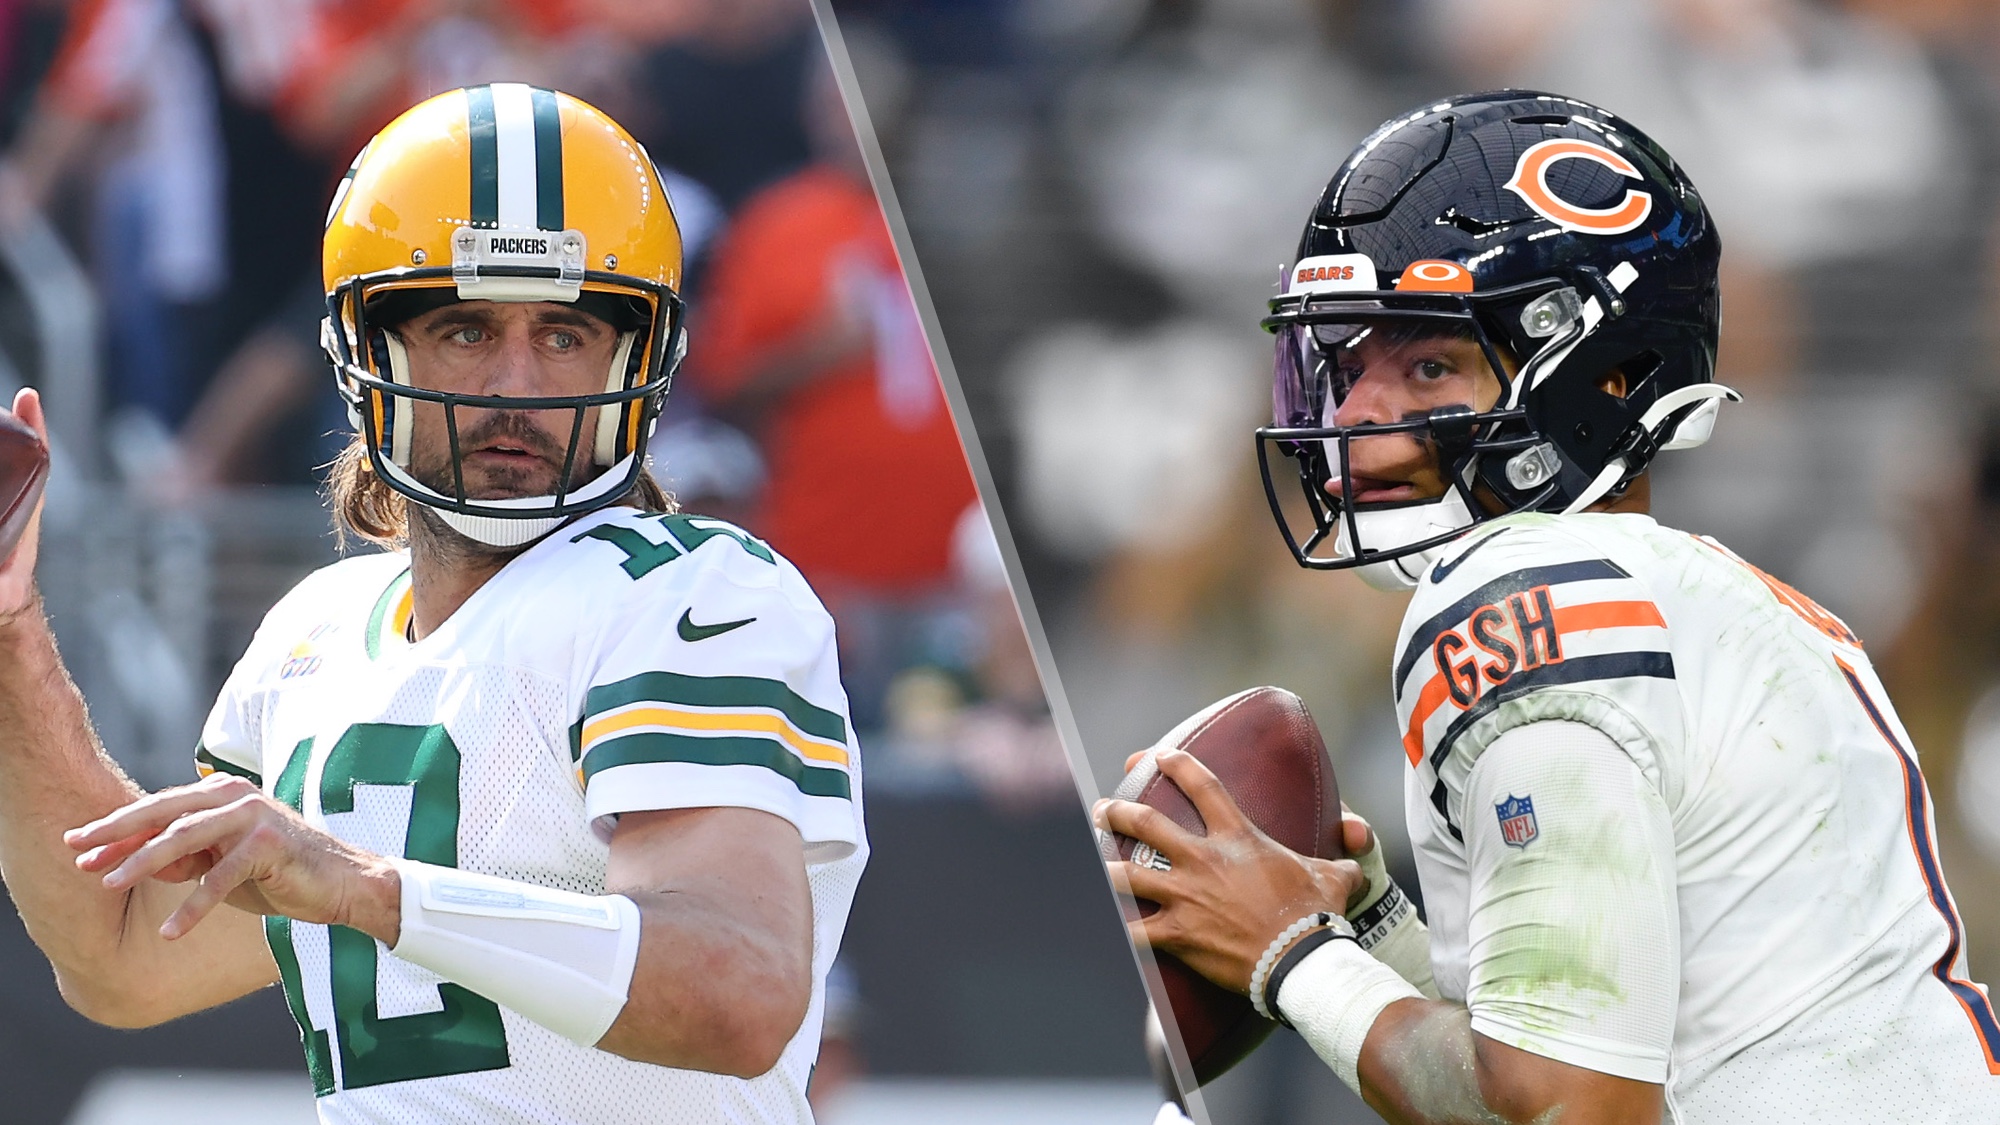 Packers vs Bears live stream is here: How to watch NFL Week 6 game